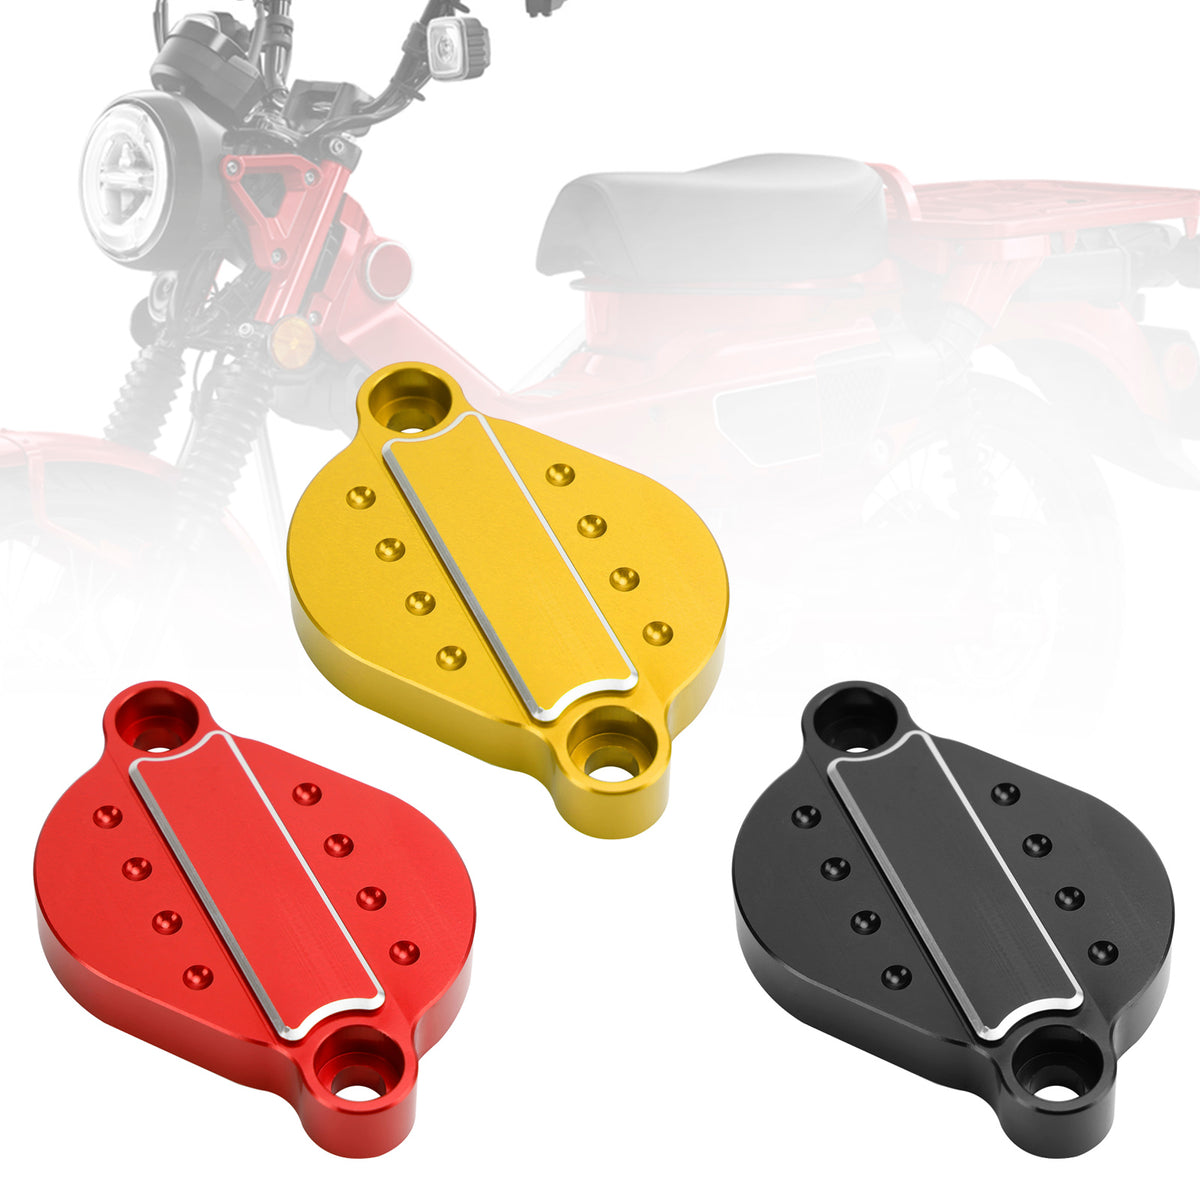 Engine Cylinder Tappet Valve Covers Cap For Honda Ct125 Cub Hunter Monkey Red